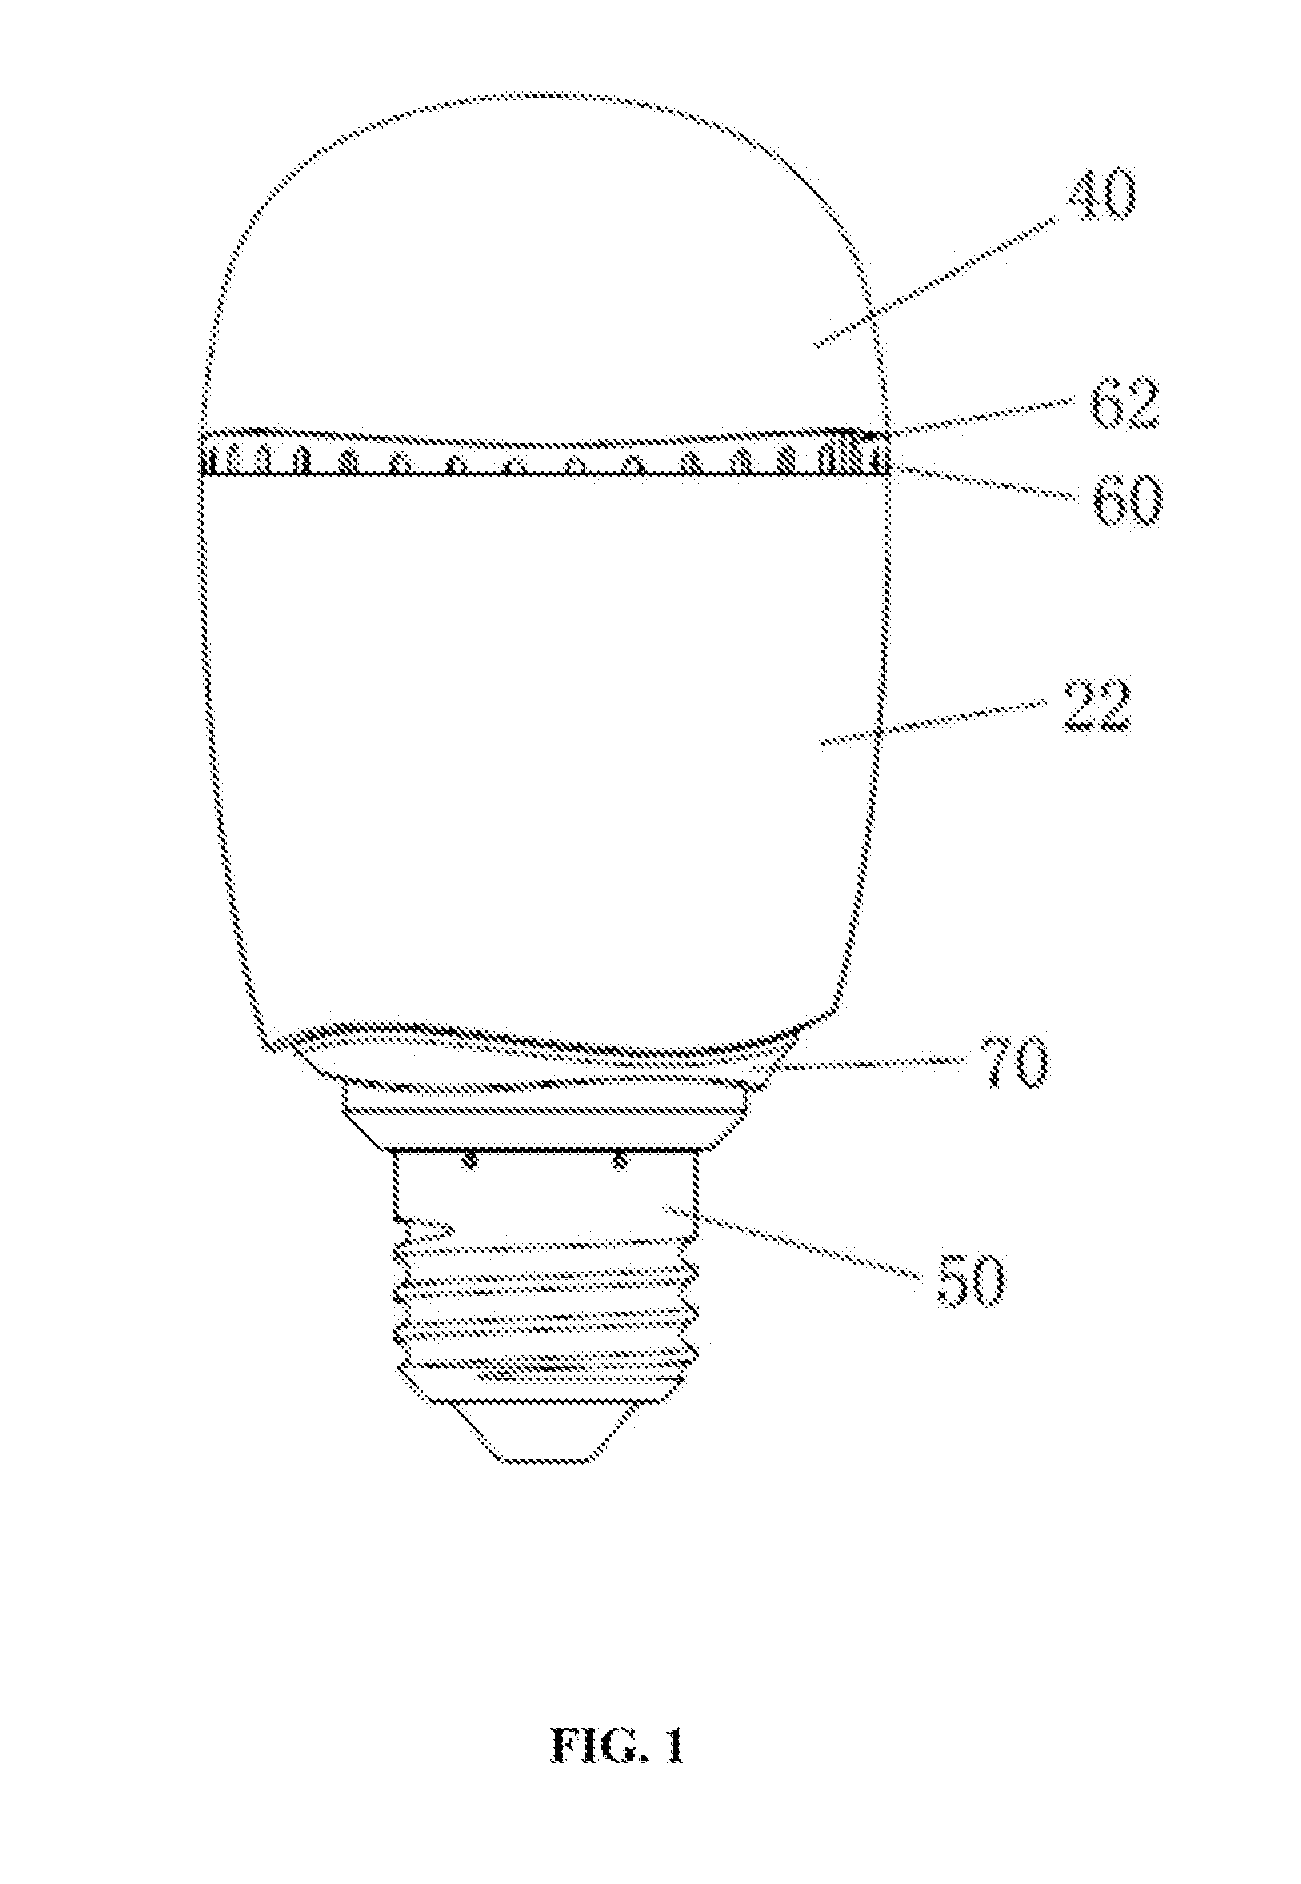 LED lighting device and system, and antenna arrangement method